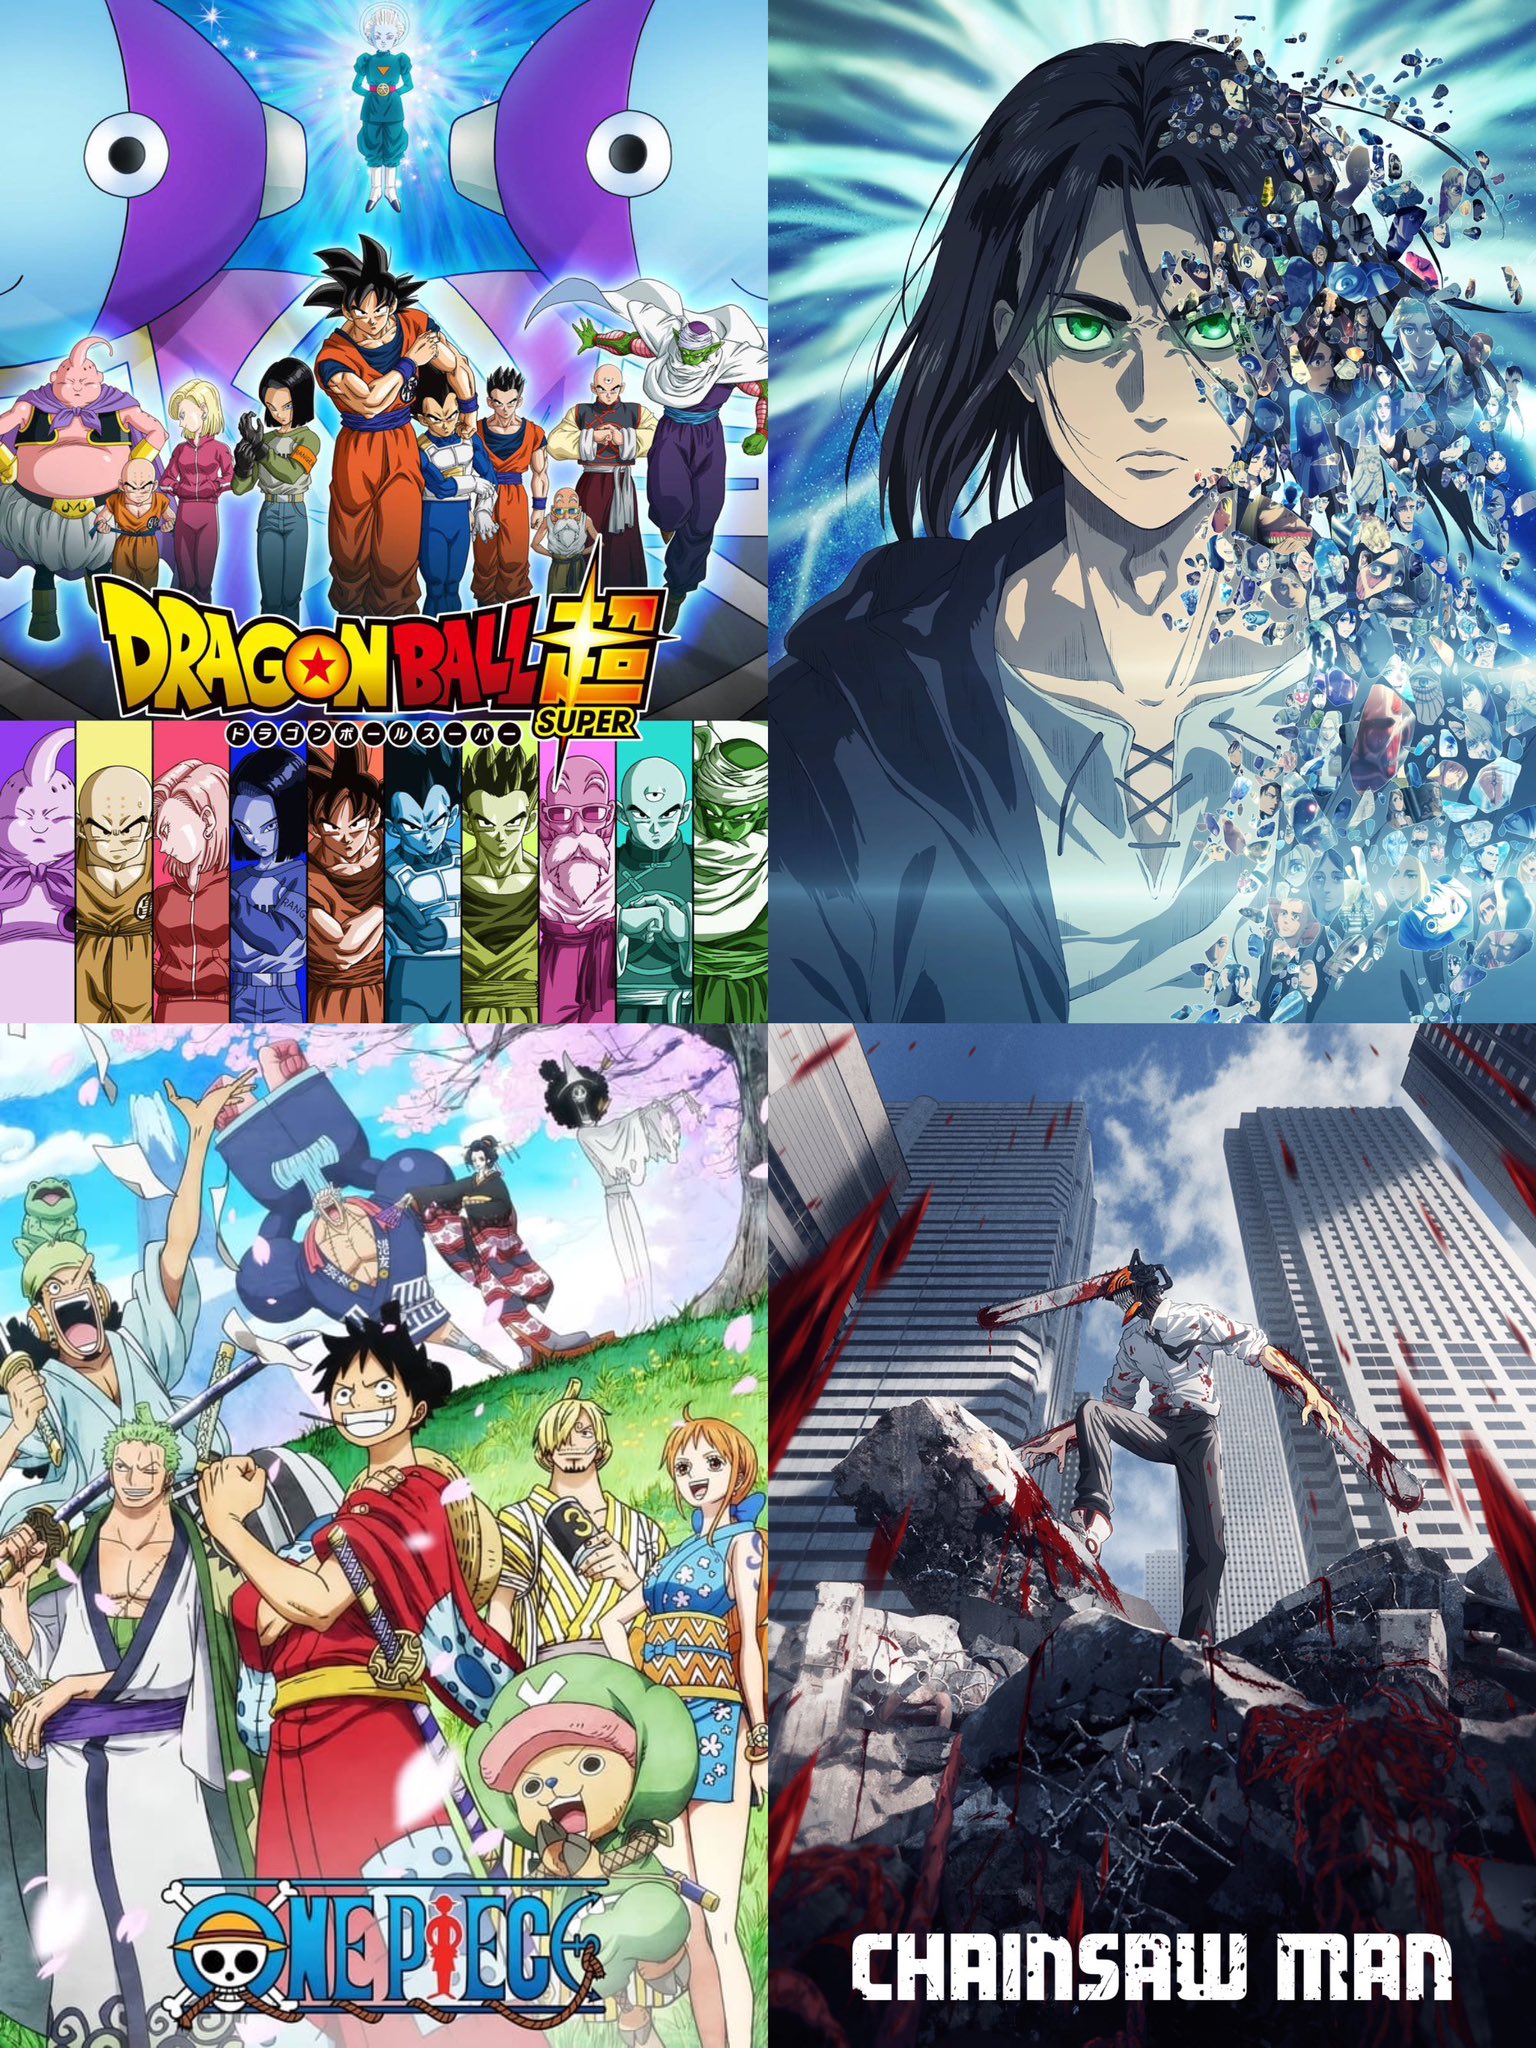 One Piece Joins Attack on Titan and Dragon Ball Super as the only animes  that broke multiple anime sites servers including Crunchyroll!! - Forums 